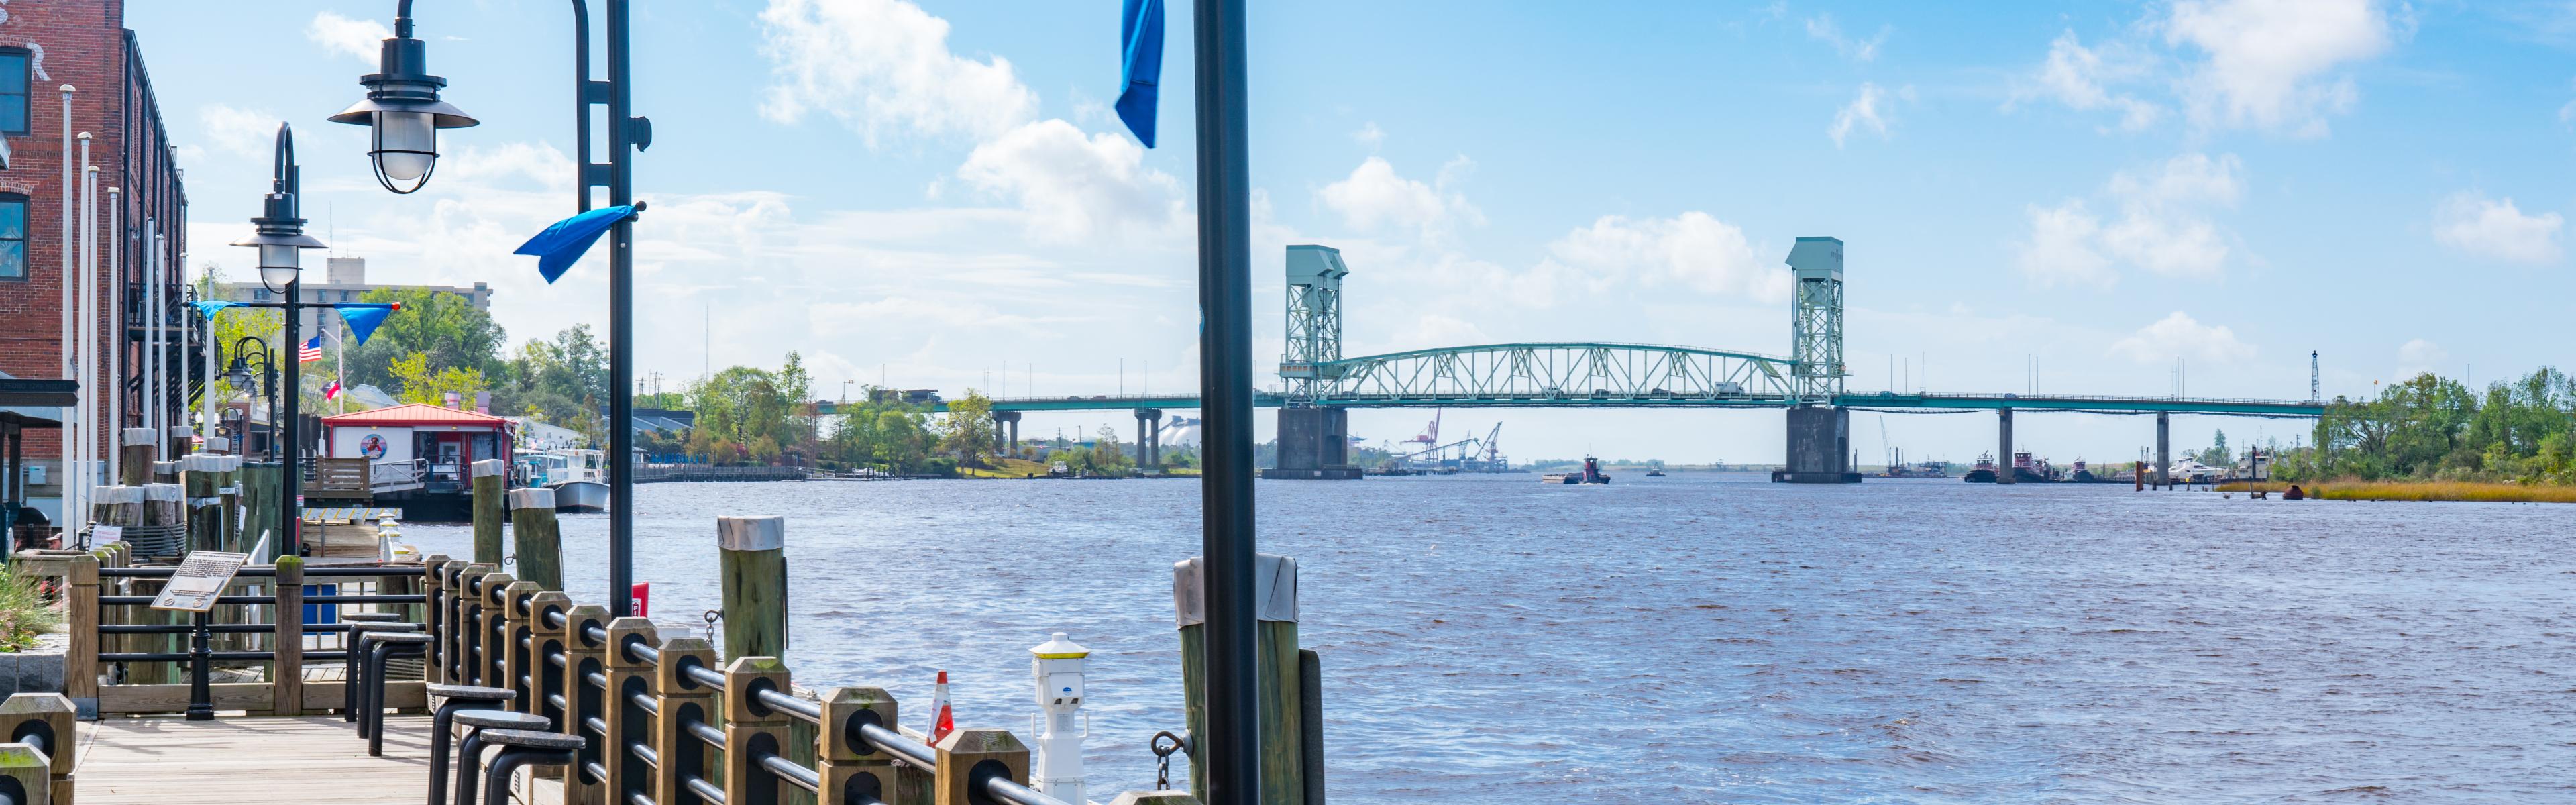 Riverwalk along the waterfront of the Cape Fear River in Wilmington, NC